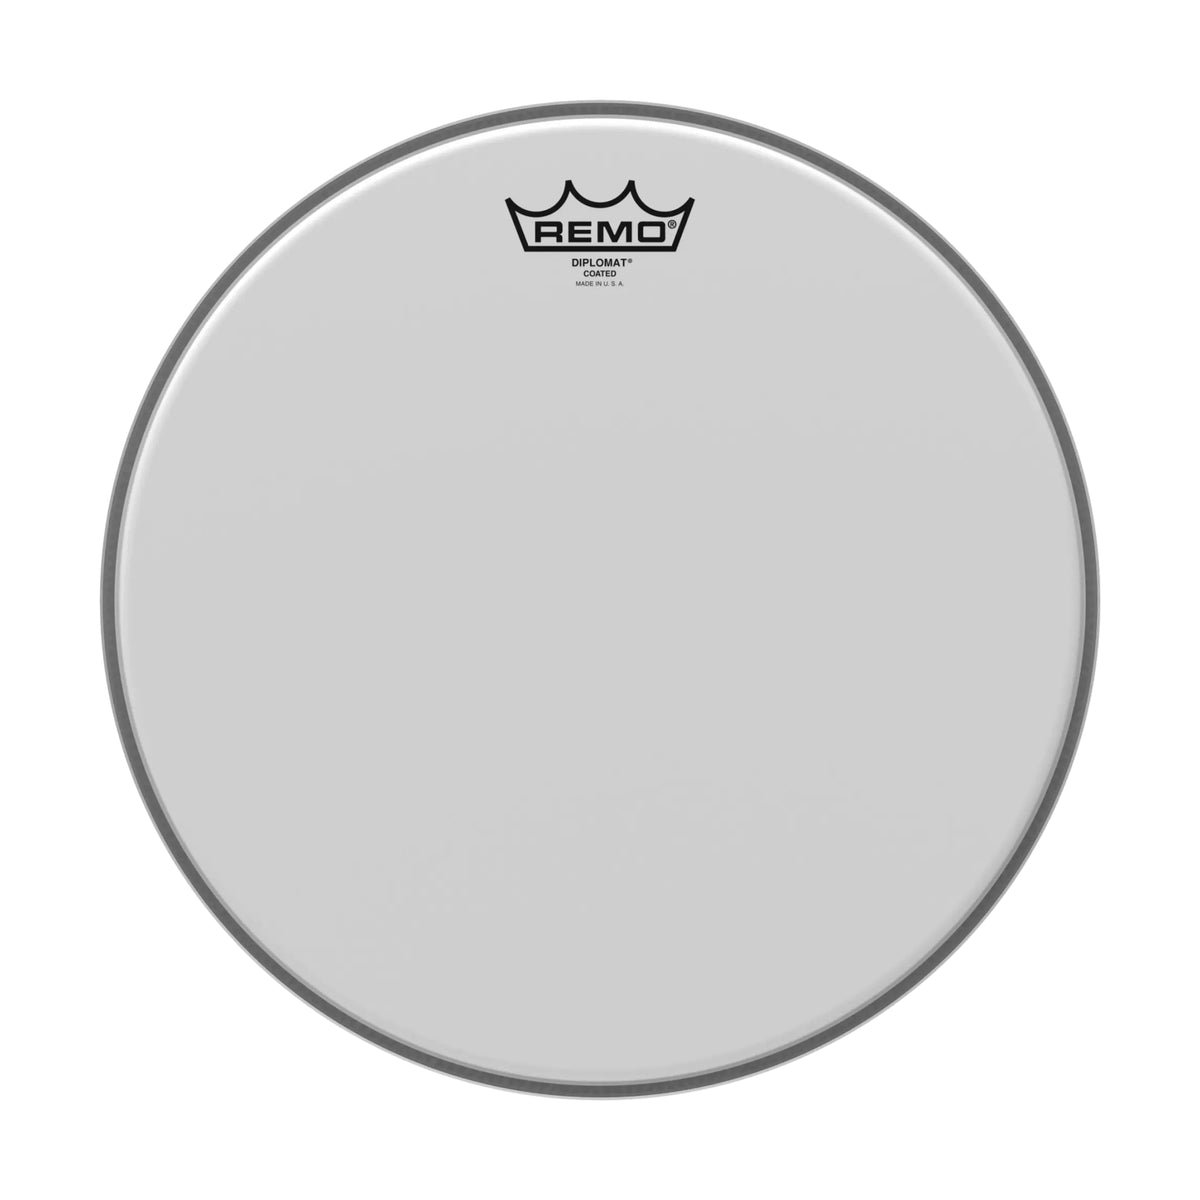 Remo Diplomat 13 Inch Coated Drum Head BD-0113-00